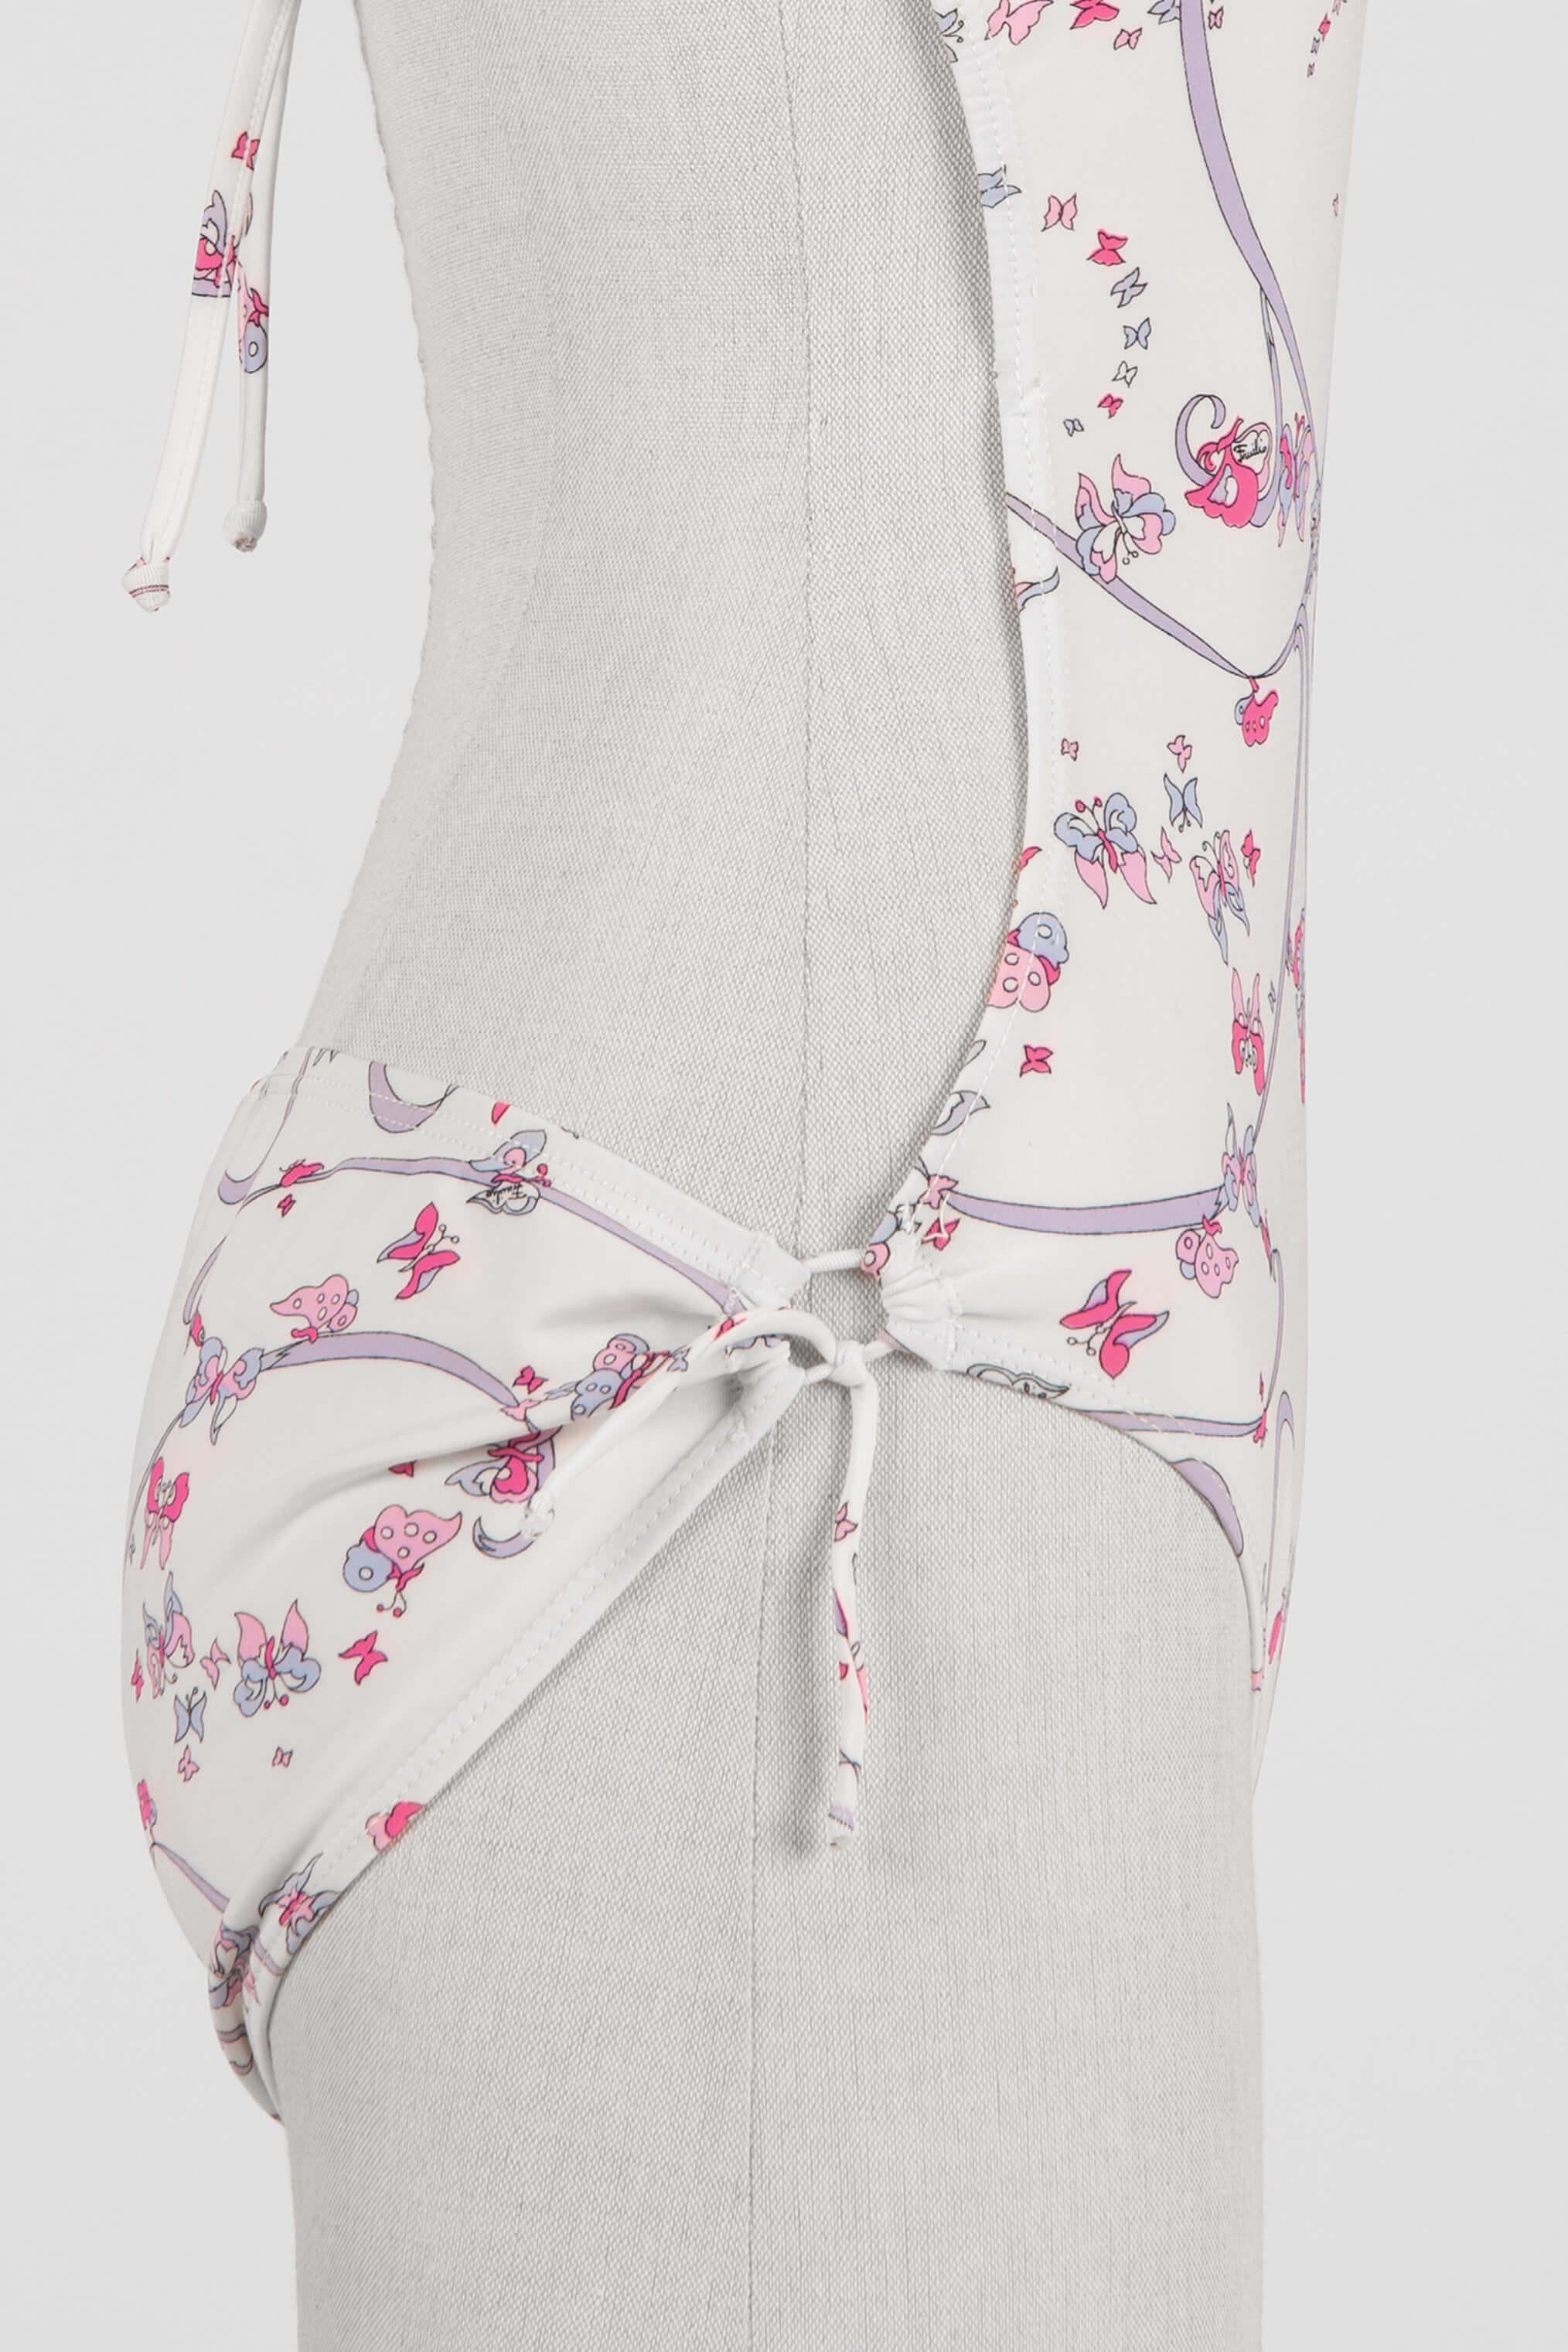 EMILIO PUCCI 1970s White Pink Signature Butterfly Print One-Piece Swimsuit In Excellent Condition For Sale In Munich, DE